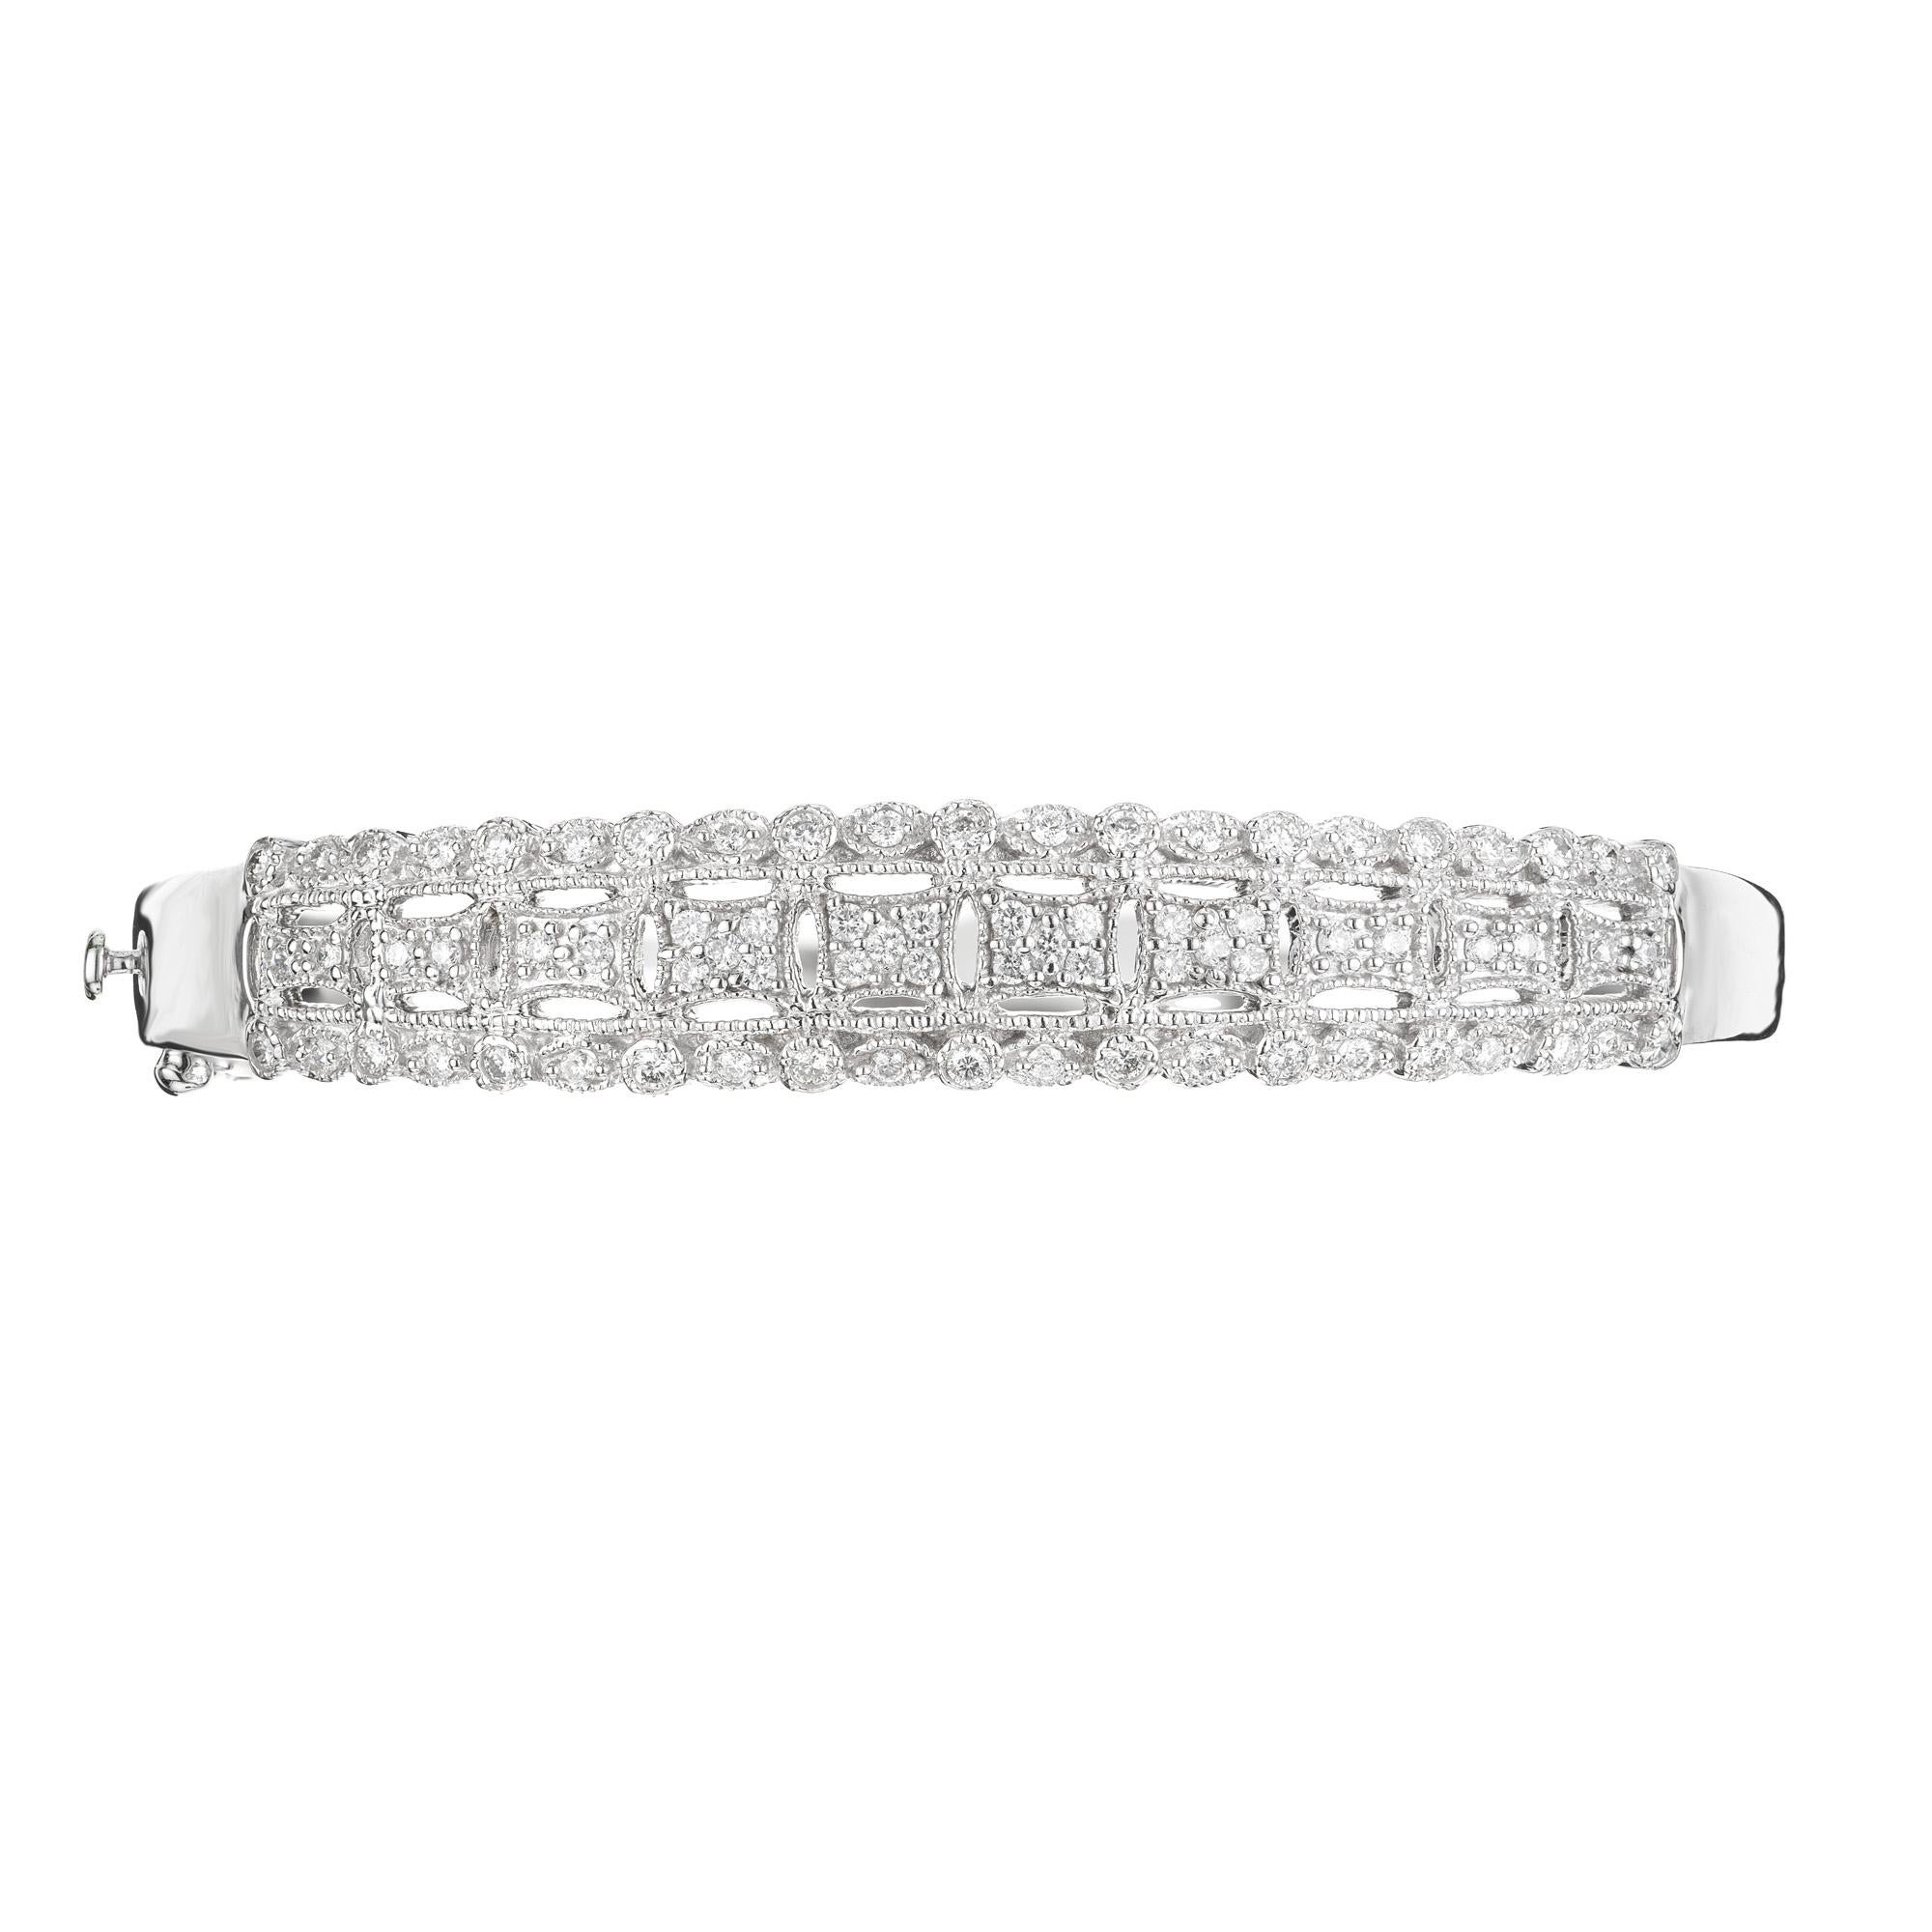 Diamond bangle bracelet. This mid-century 1960's bracelet consists of 74 round full cut diamonds totaling 1.20cts.  Highly detailed and open work, 14k white gold bracelet. This is a hinge bangle making it easier to put on. 

74 round full cut